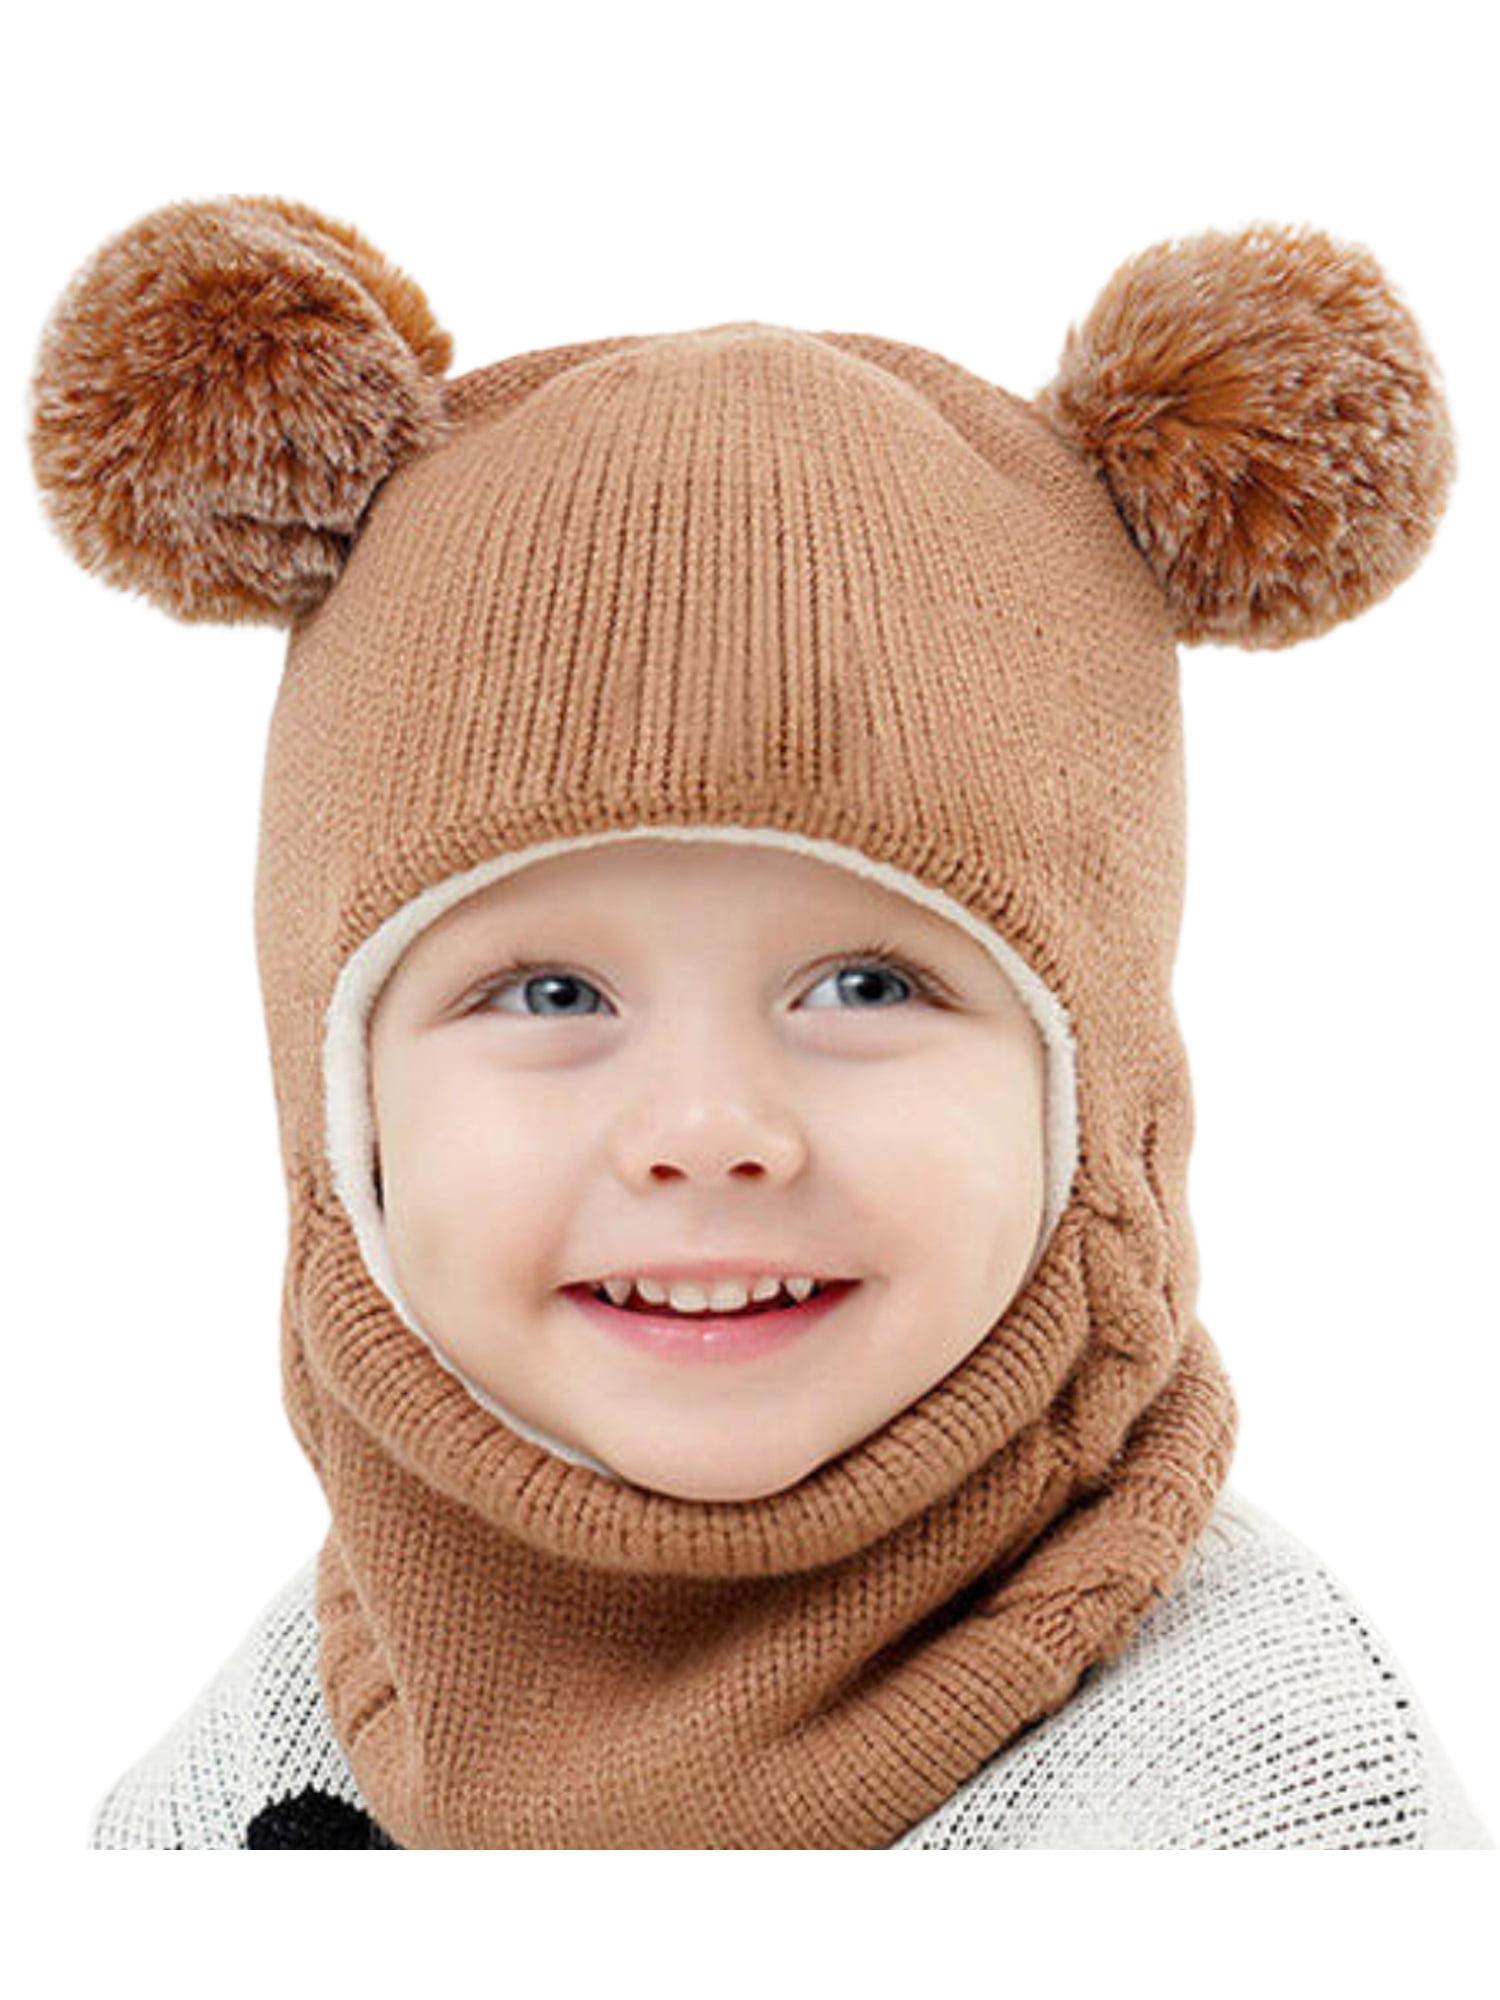 Winter Baby Knitted Hat Scarf Kids Boys Girls Hood Hats Toddler Earflap Beanie with Pompom 